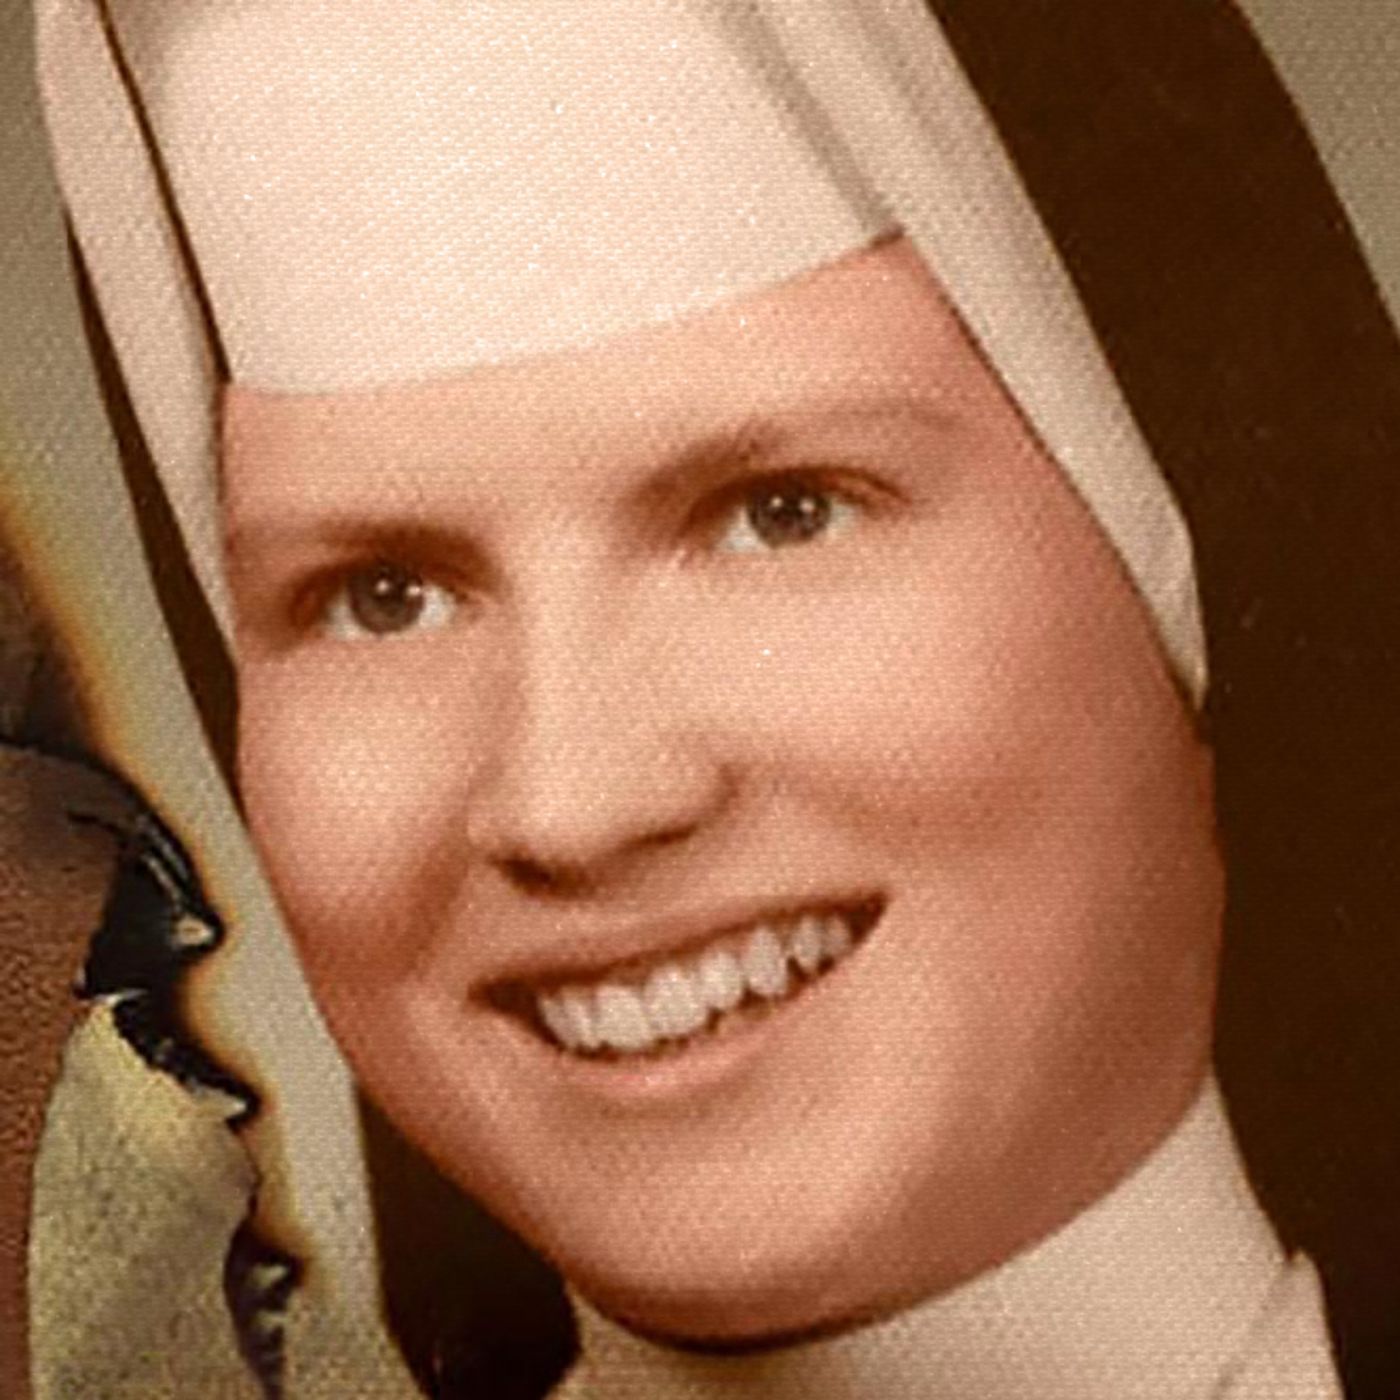 S2 Ep16: Sister Cathy, Unmasking Darkness with Jane Doe and The Keepers’ Director, Part 1